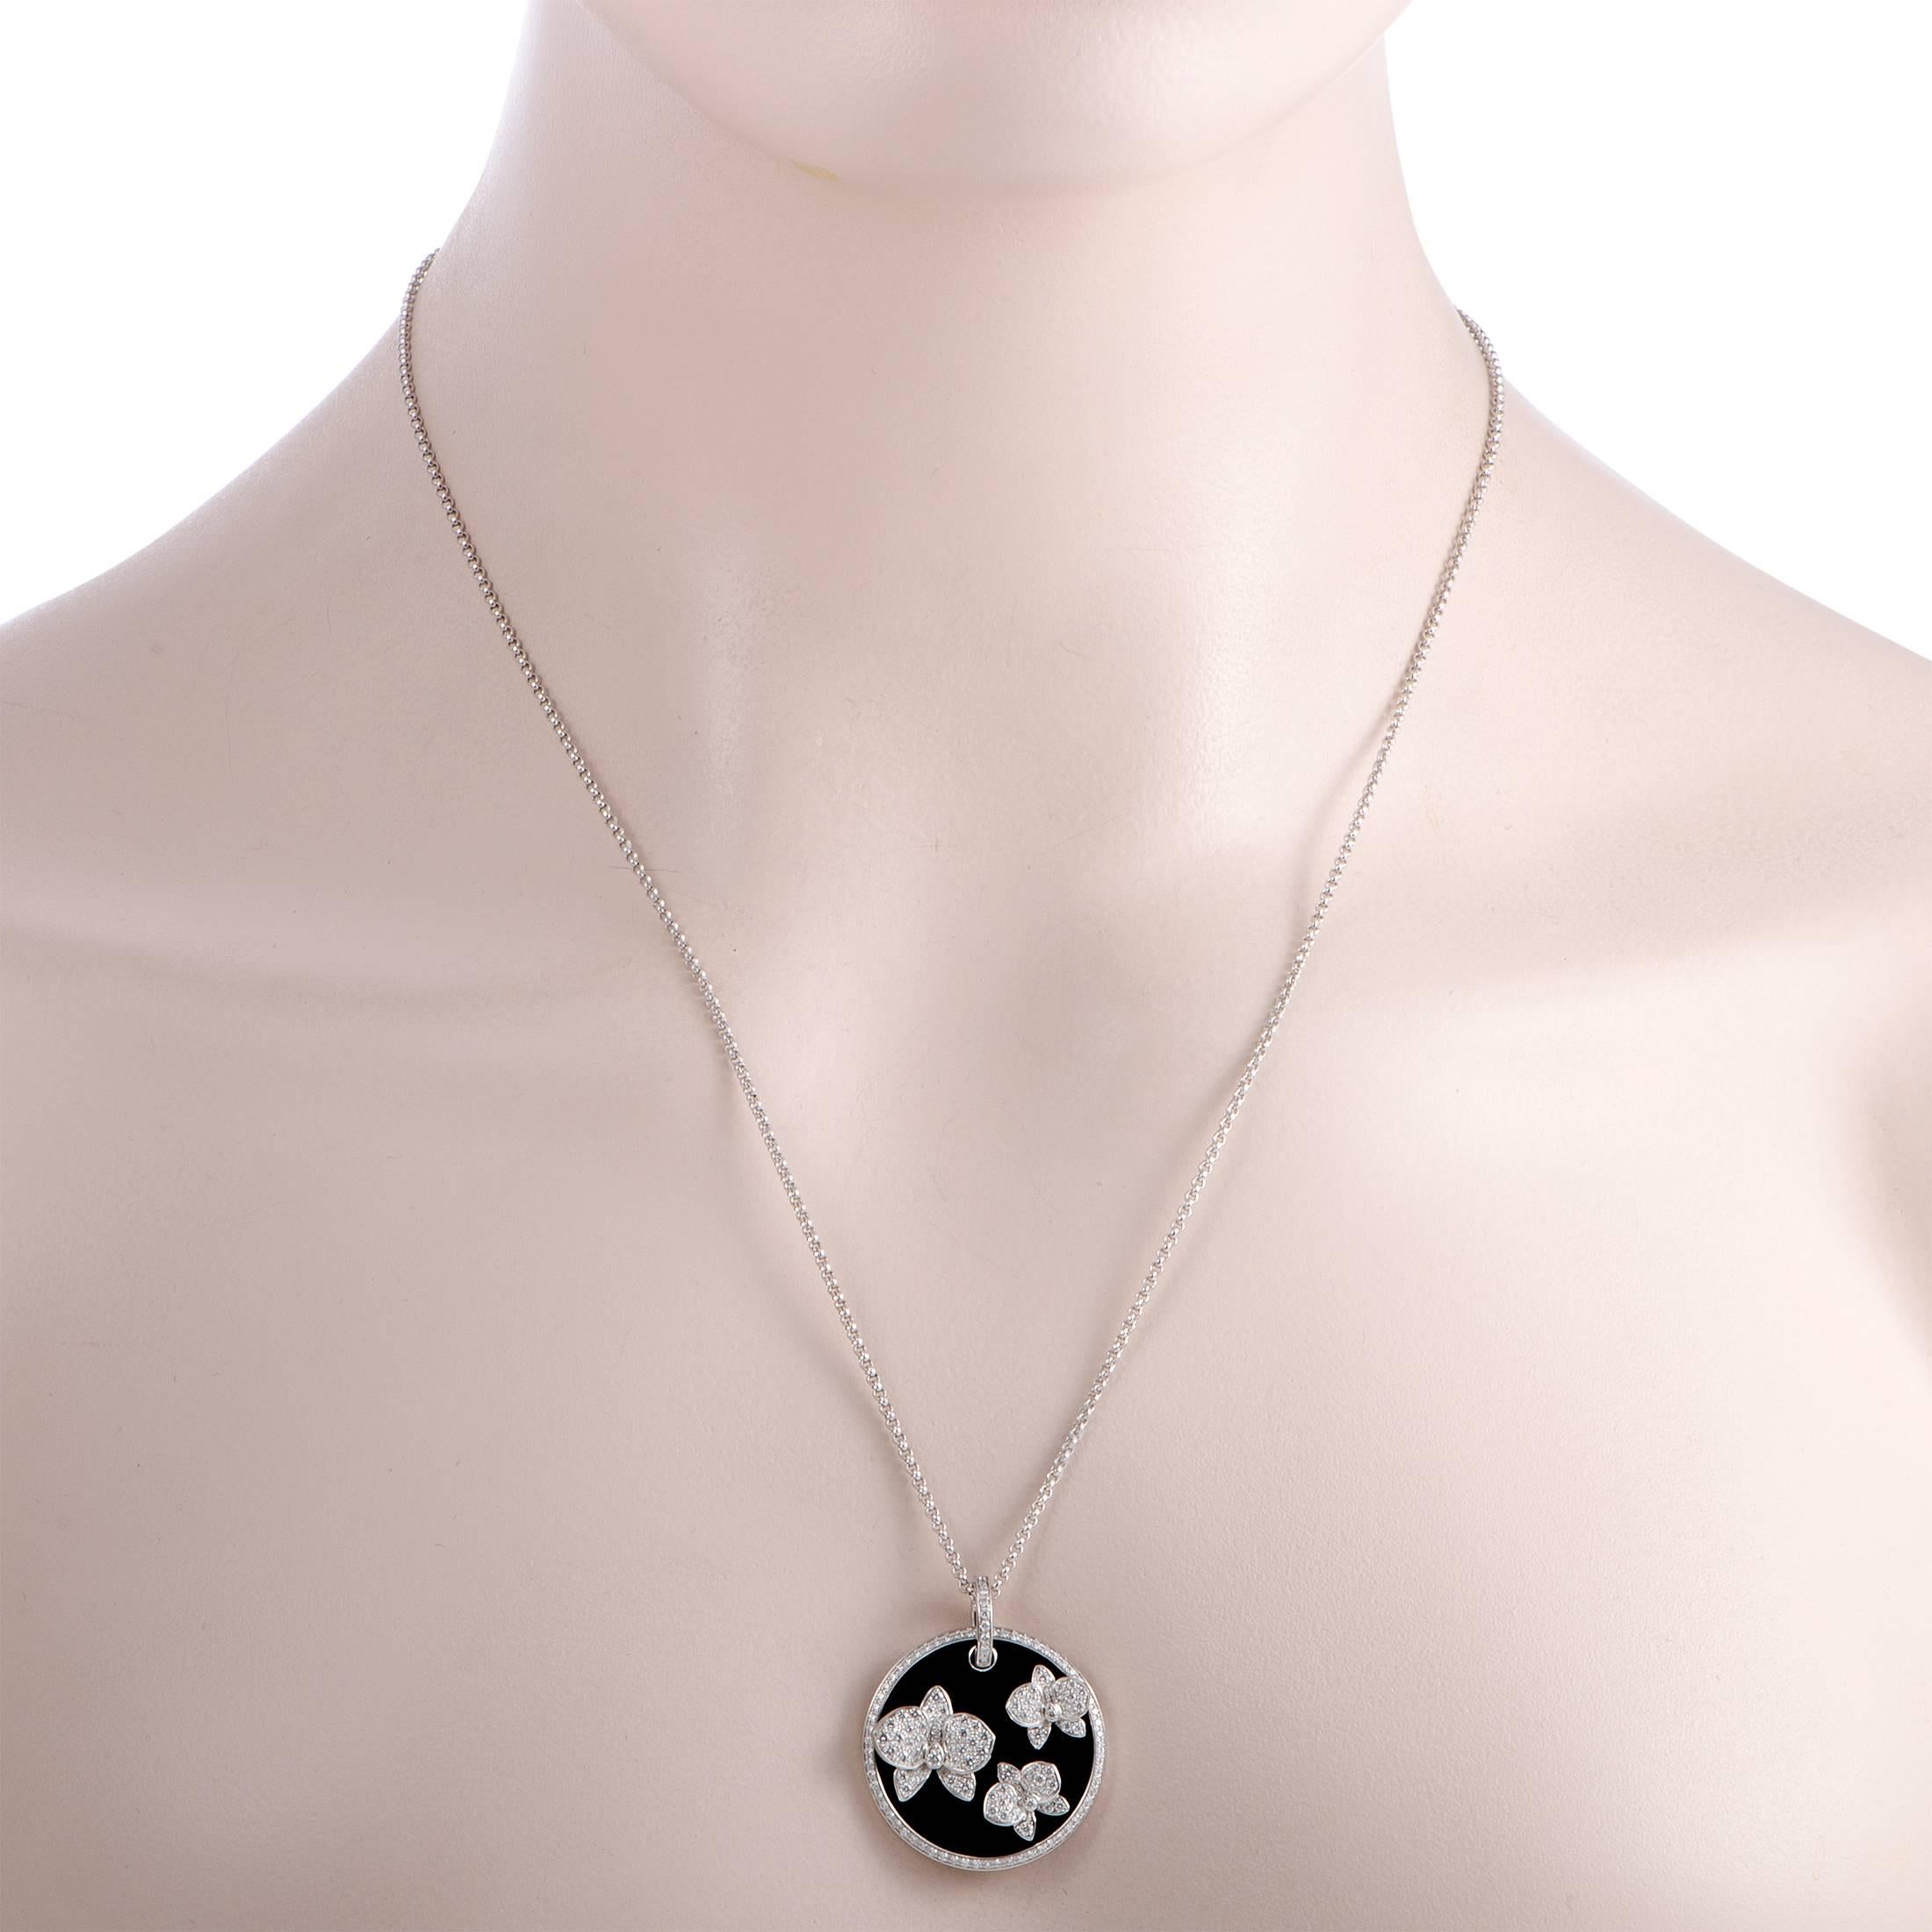 Perfect if you want to complete your look with an eye-catching high-end piece, this “Caresse d'orchidées par Cartier” necklace is made of elegant 18K white gold and features a delightful pendant that boasts striking onyx and gorgeous diamond-set